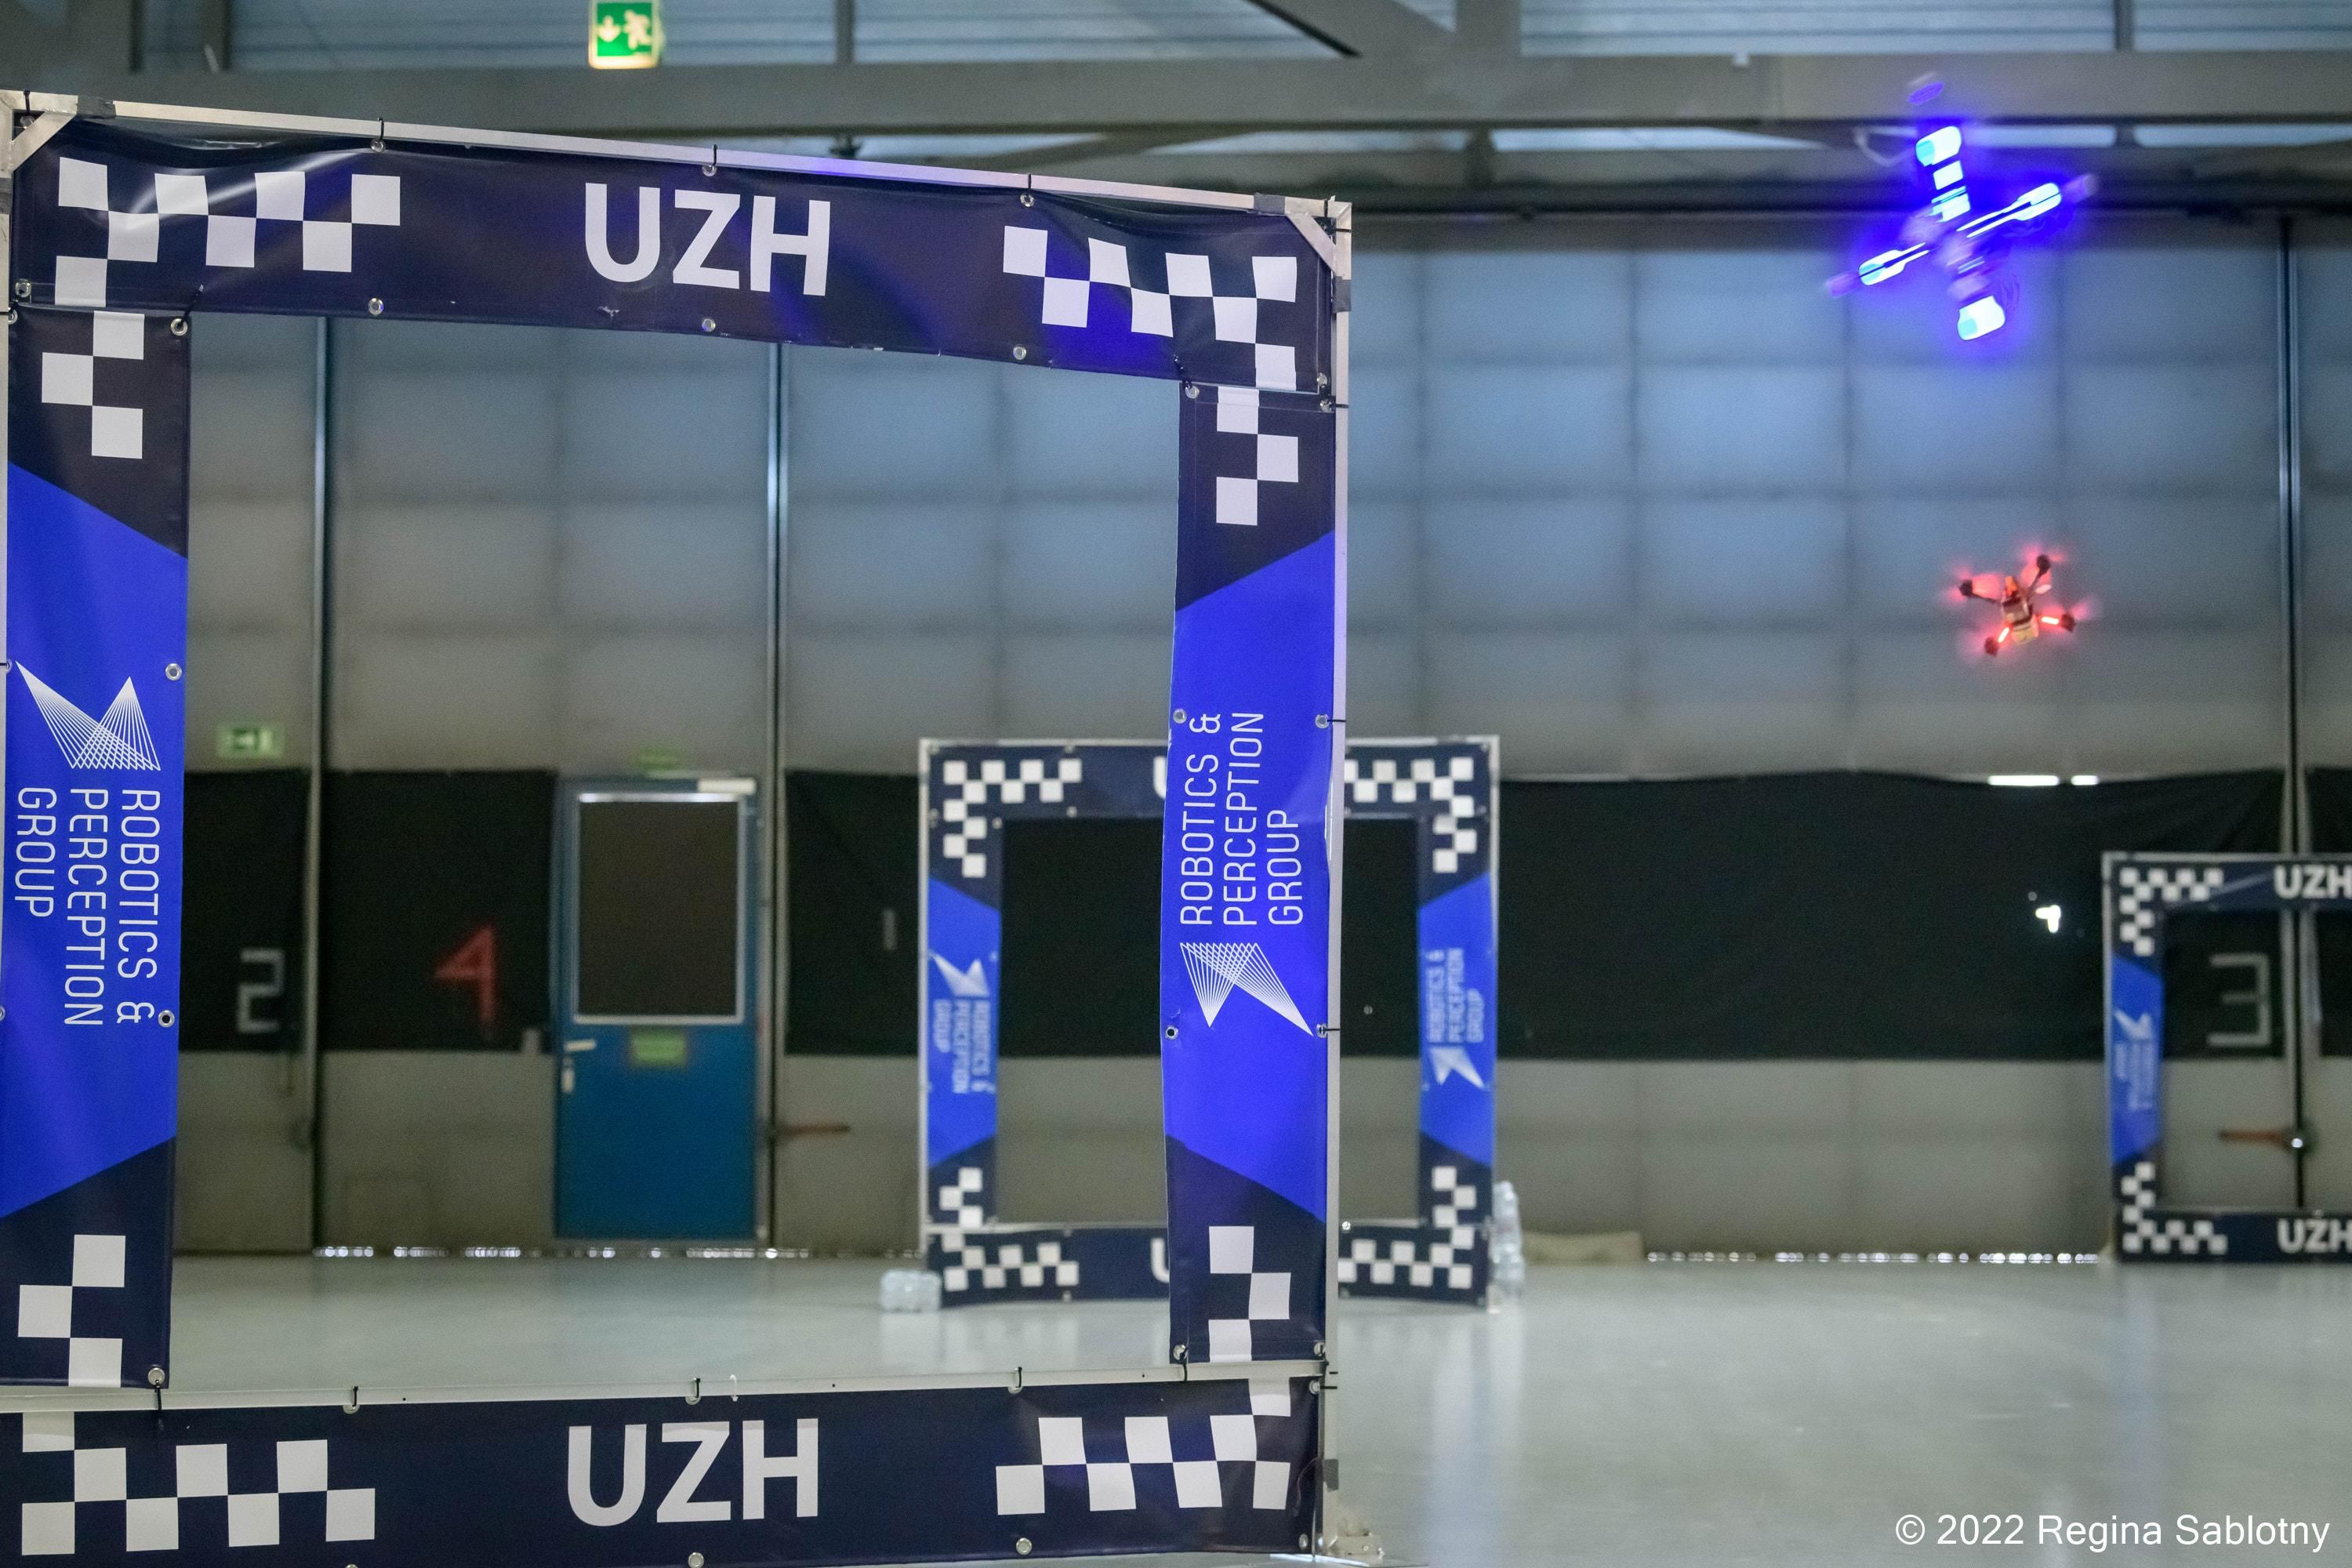 Two drones, one red and one blue, fly through gates in a drone racing course inside an aircraft hangar